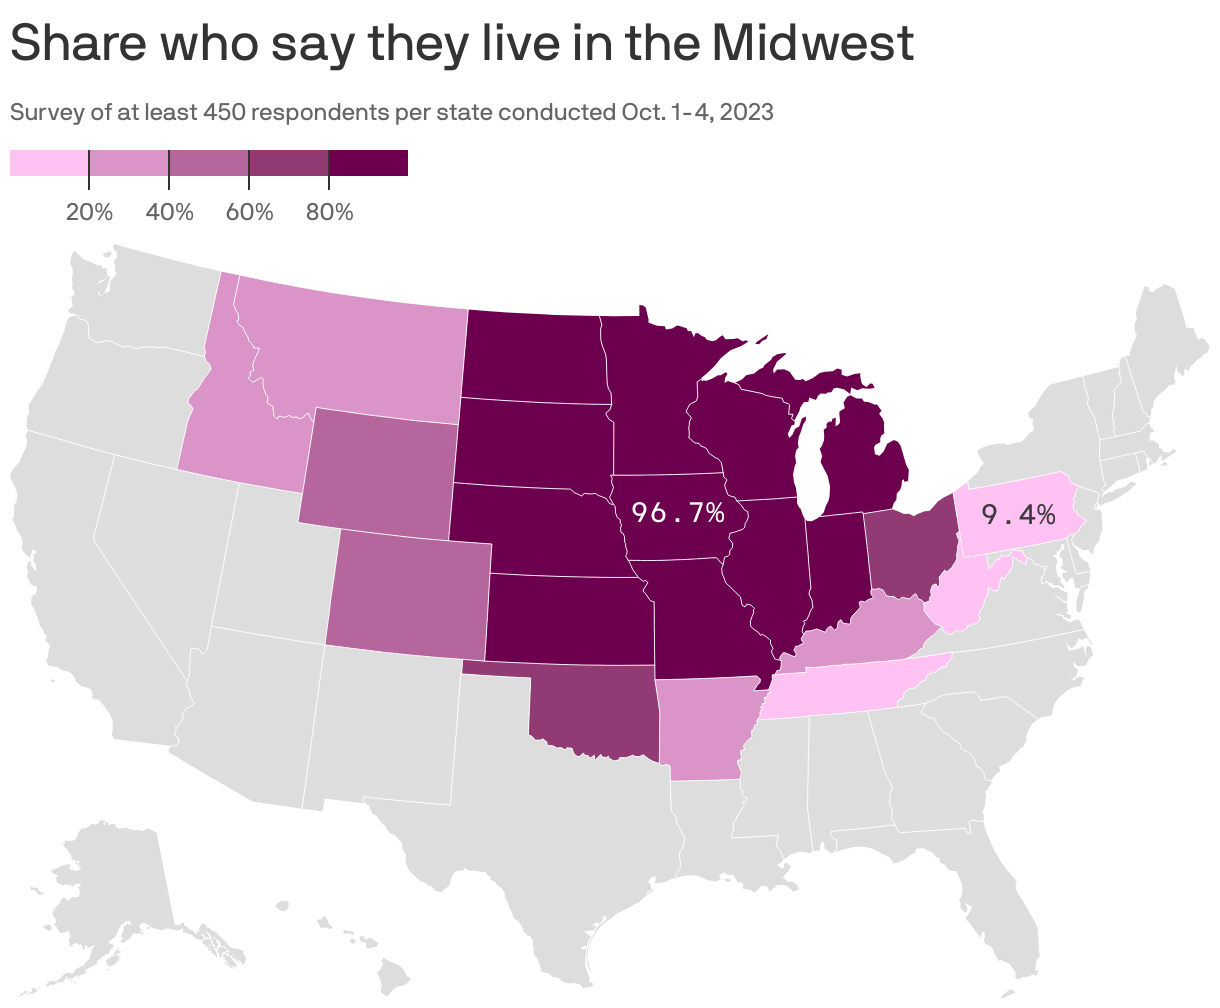 Share who say they live in the Midwest